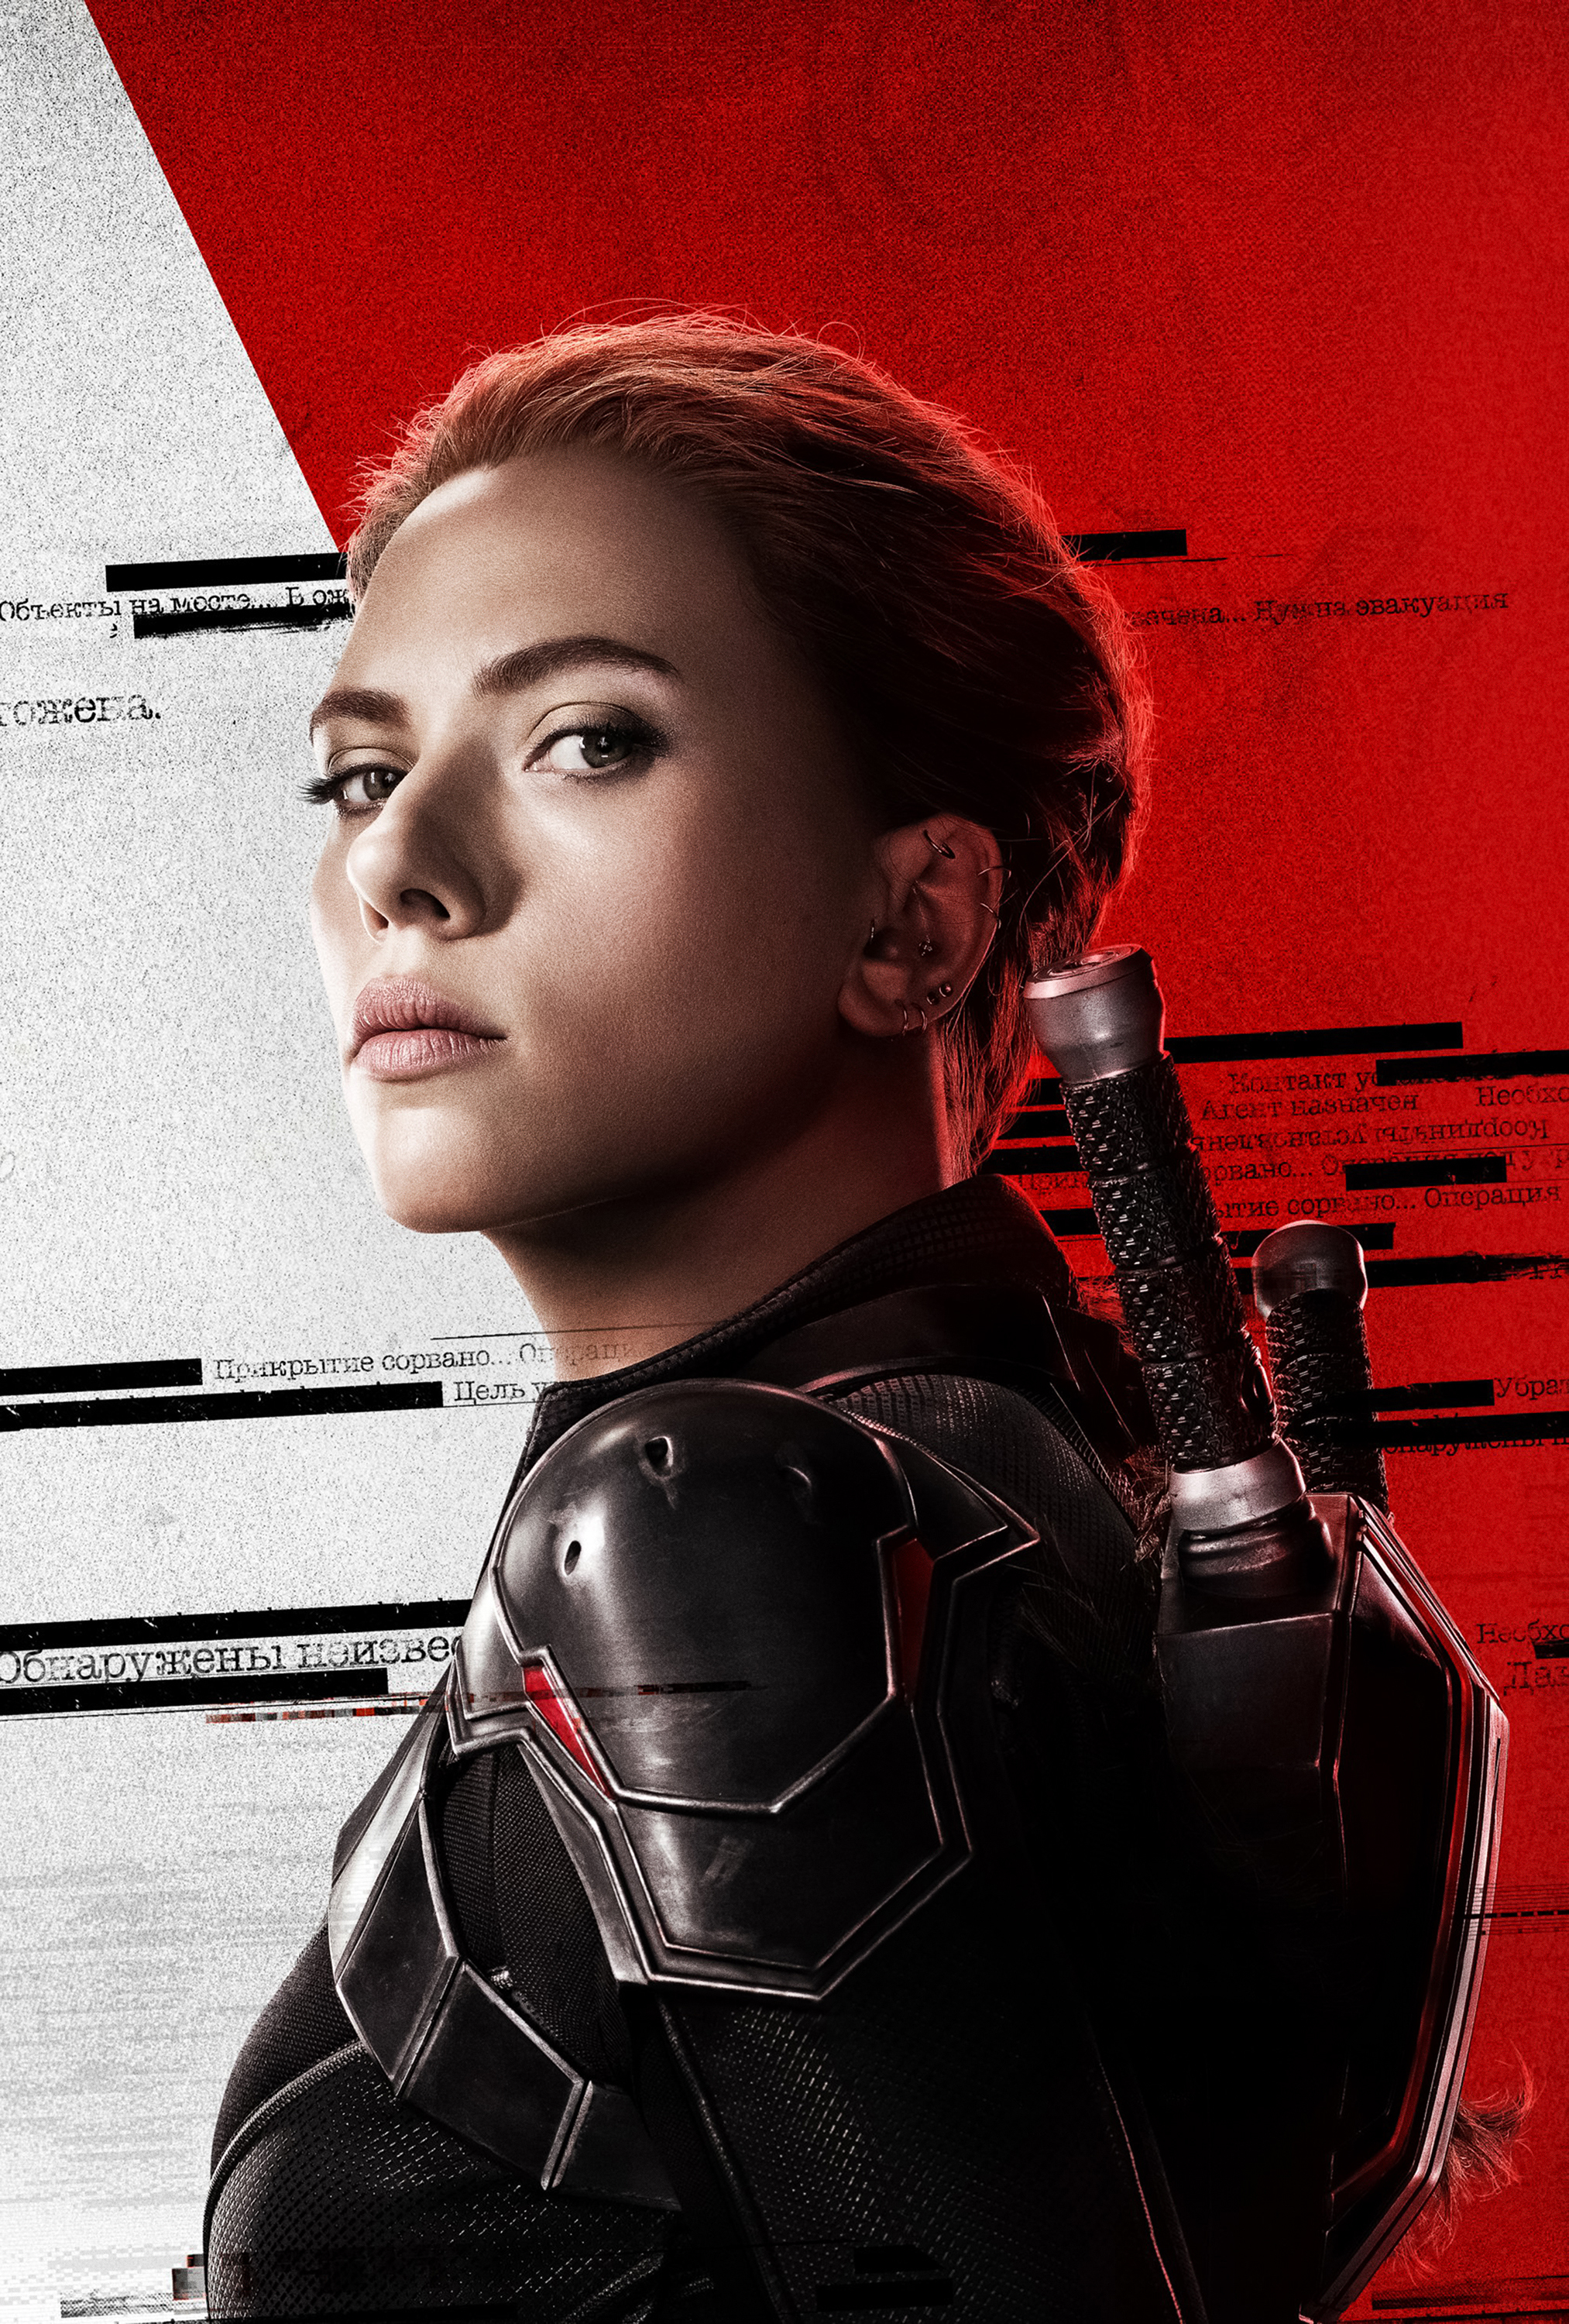 Marvel Black Widow Wallpaper, HD Movies 4K Wallpapers, Images, Photos